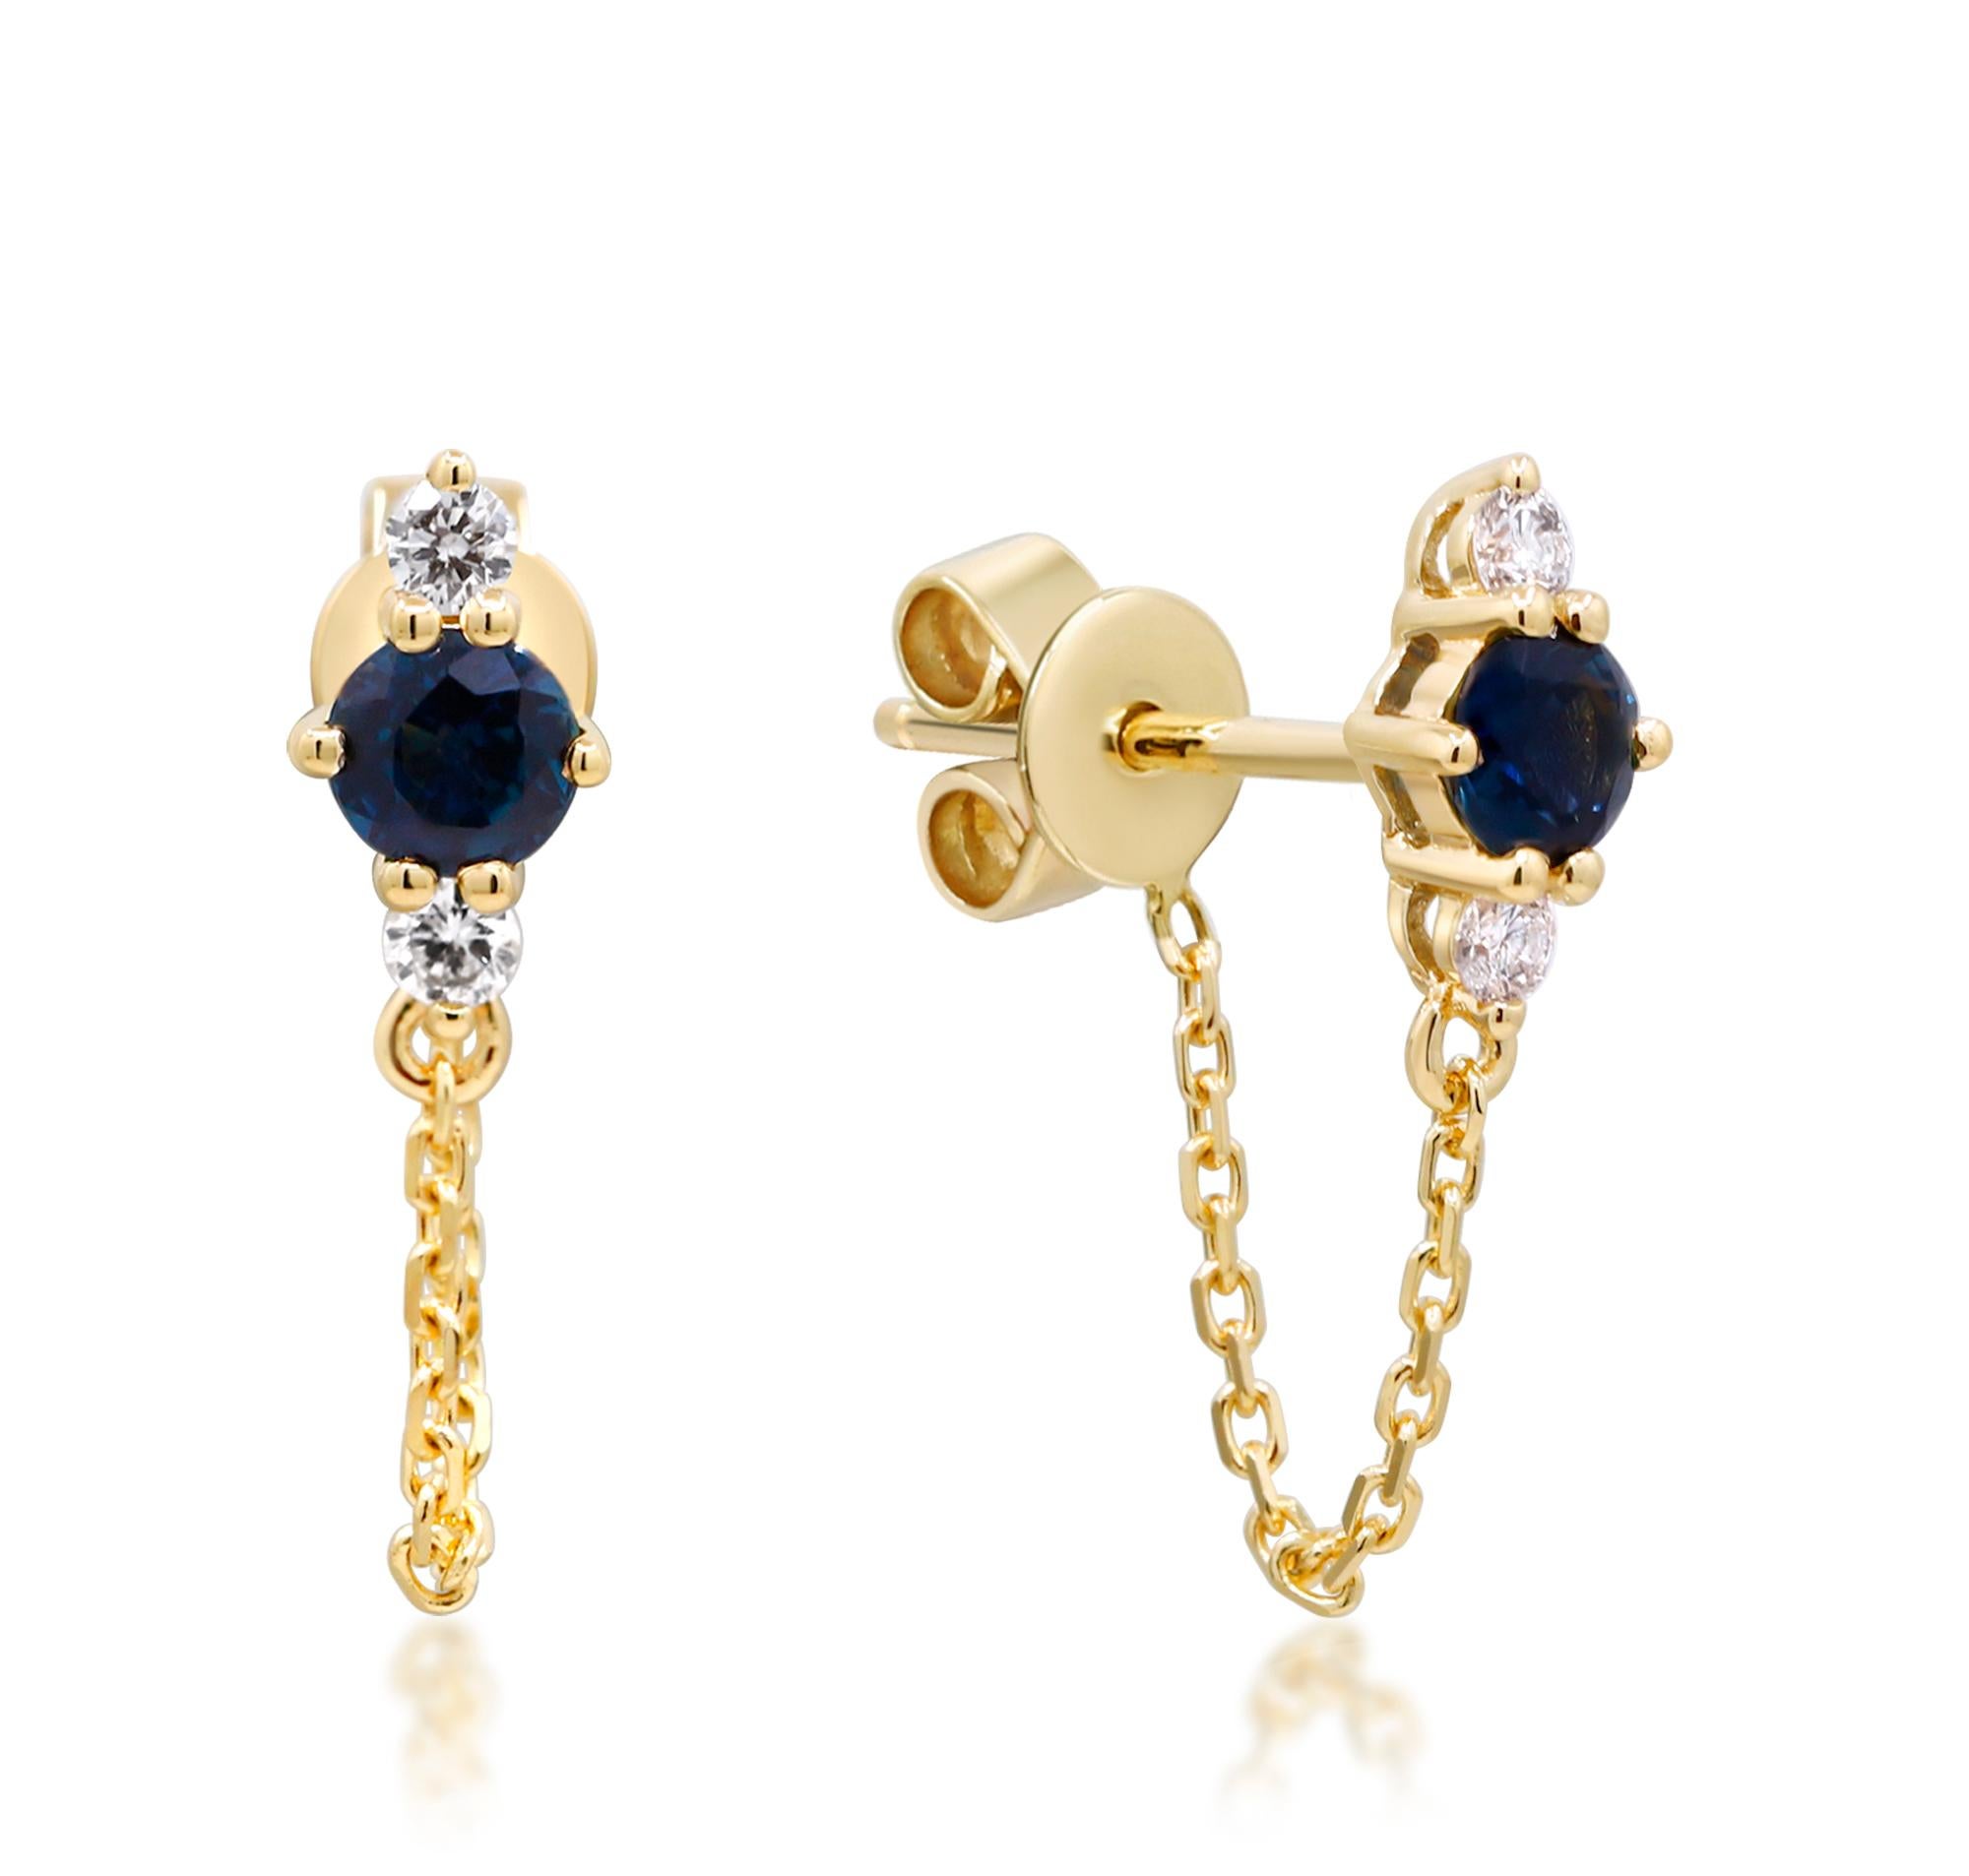 Decorate yourself in elegance with this Earring is crafted from 14-karat Yellow Gold by Gin & Grace Earring. This Earring is made up of 4.0 mm Round-cut (2 pcs) 0.47 carat Blue Sapphire and Round-cut White Diamond (4 pcs) 0.10 carat. This Earring is